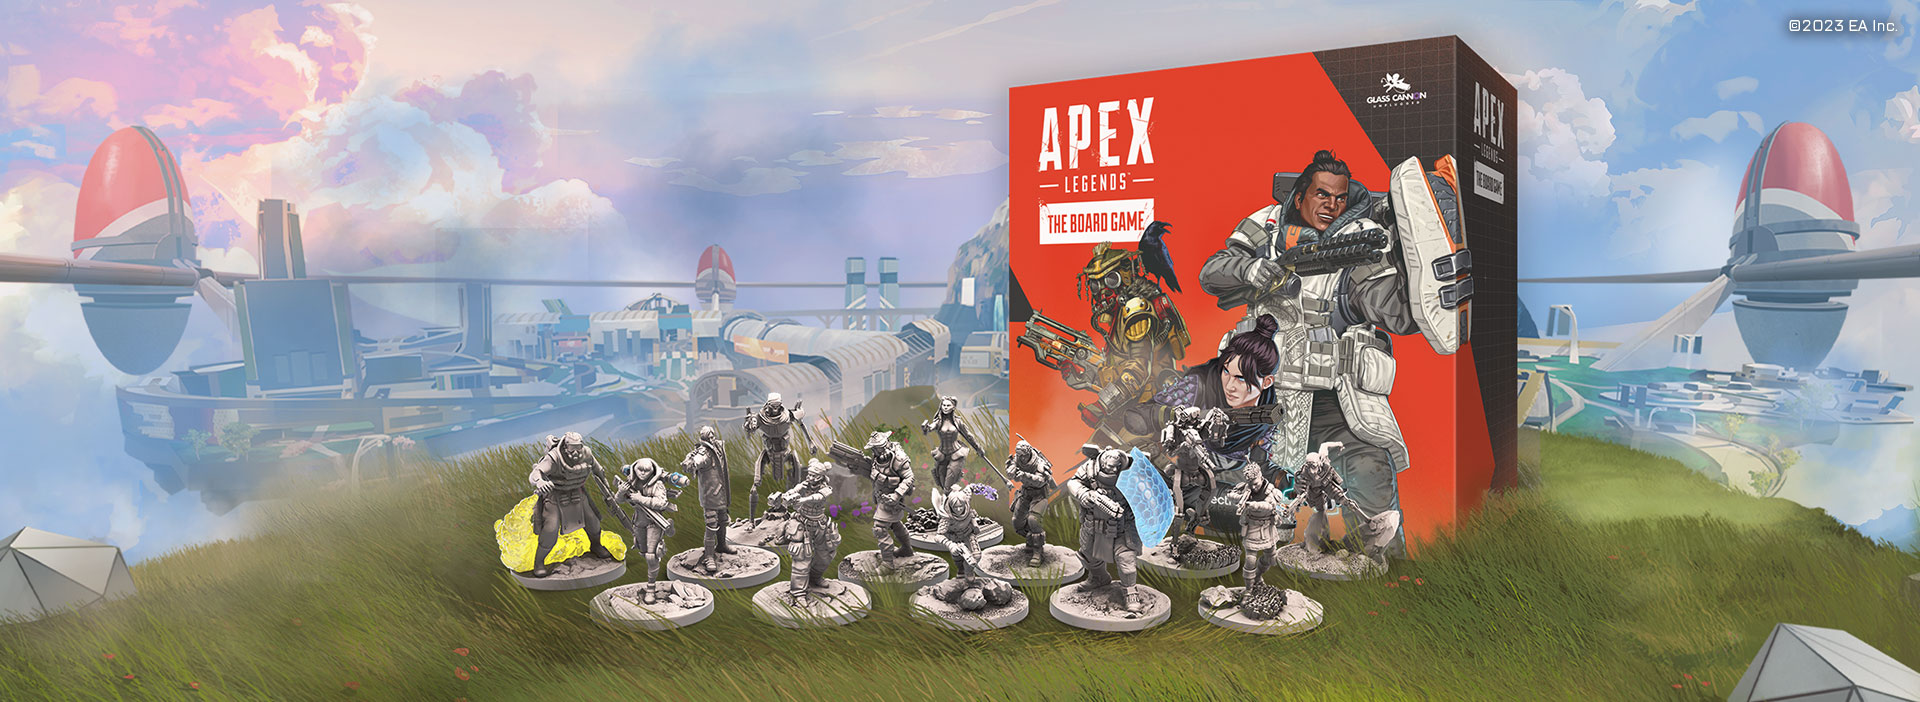 Glass Cannon Unplugged - Apex Legends: The Board Game (Sleeves Pack)